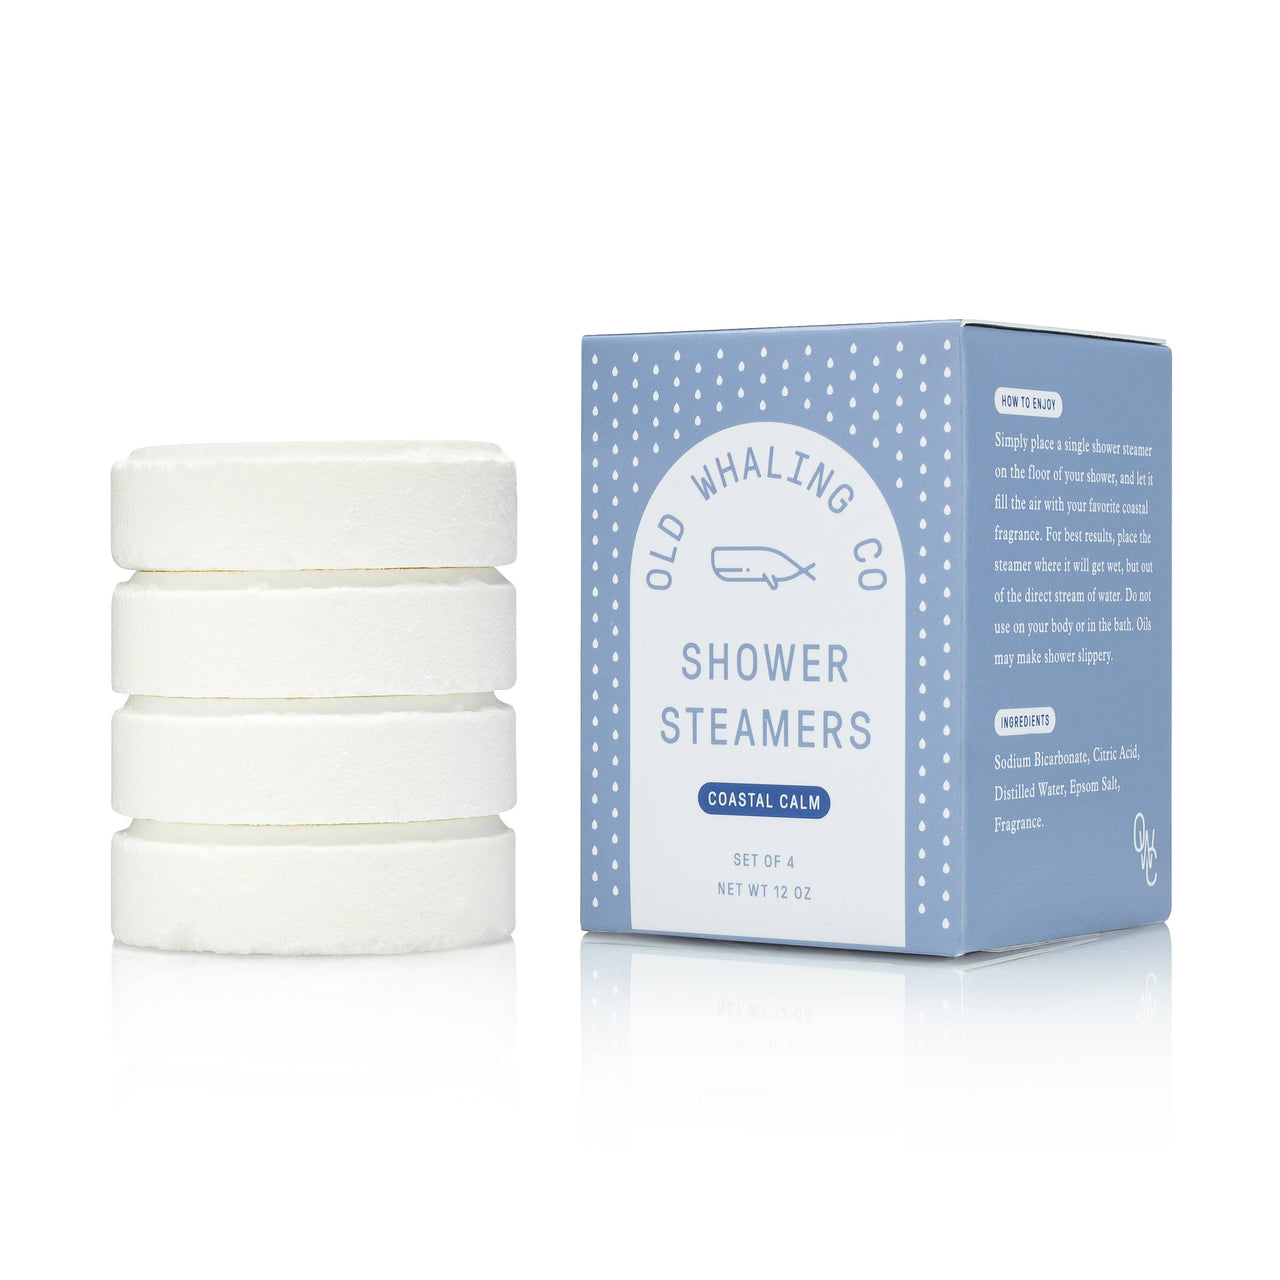 Coastal Calm Shower Steamers  Old Whaling Company   